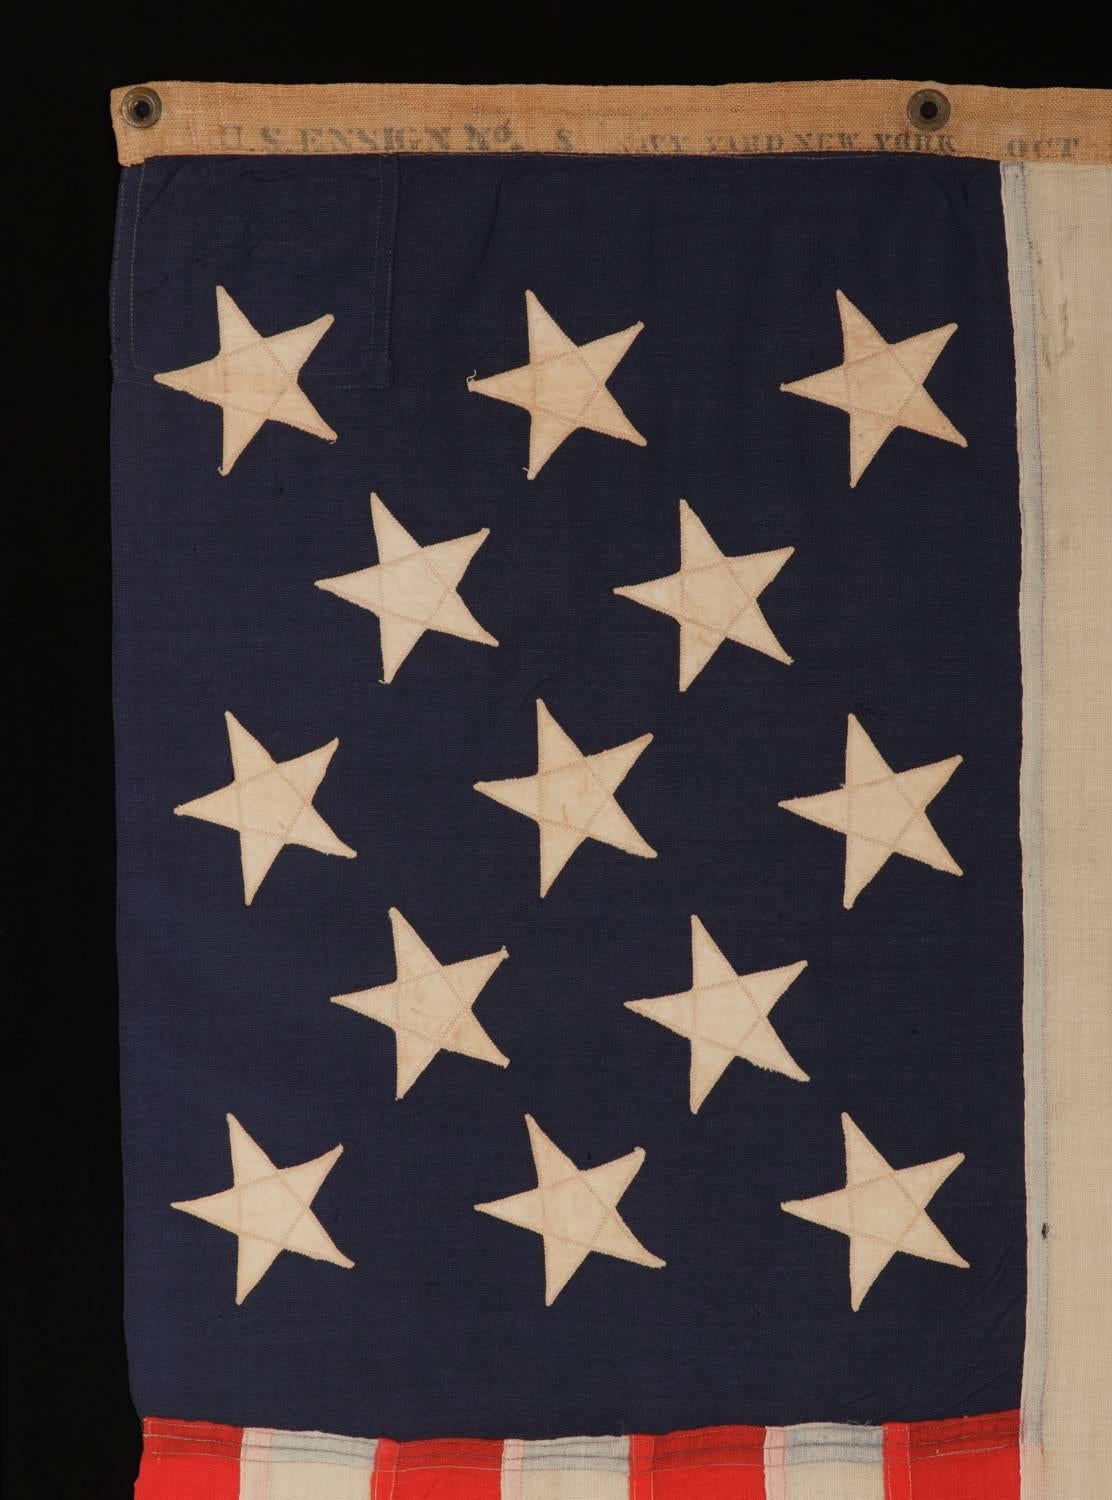 Other 13 Stars, U.S Navy Small Boat Ensign Made at the Brooklyn Navy Yard, NYC, 1907